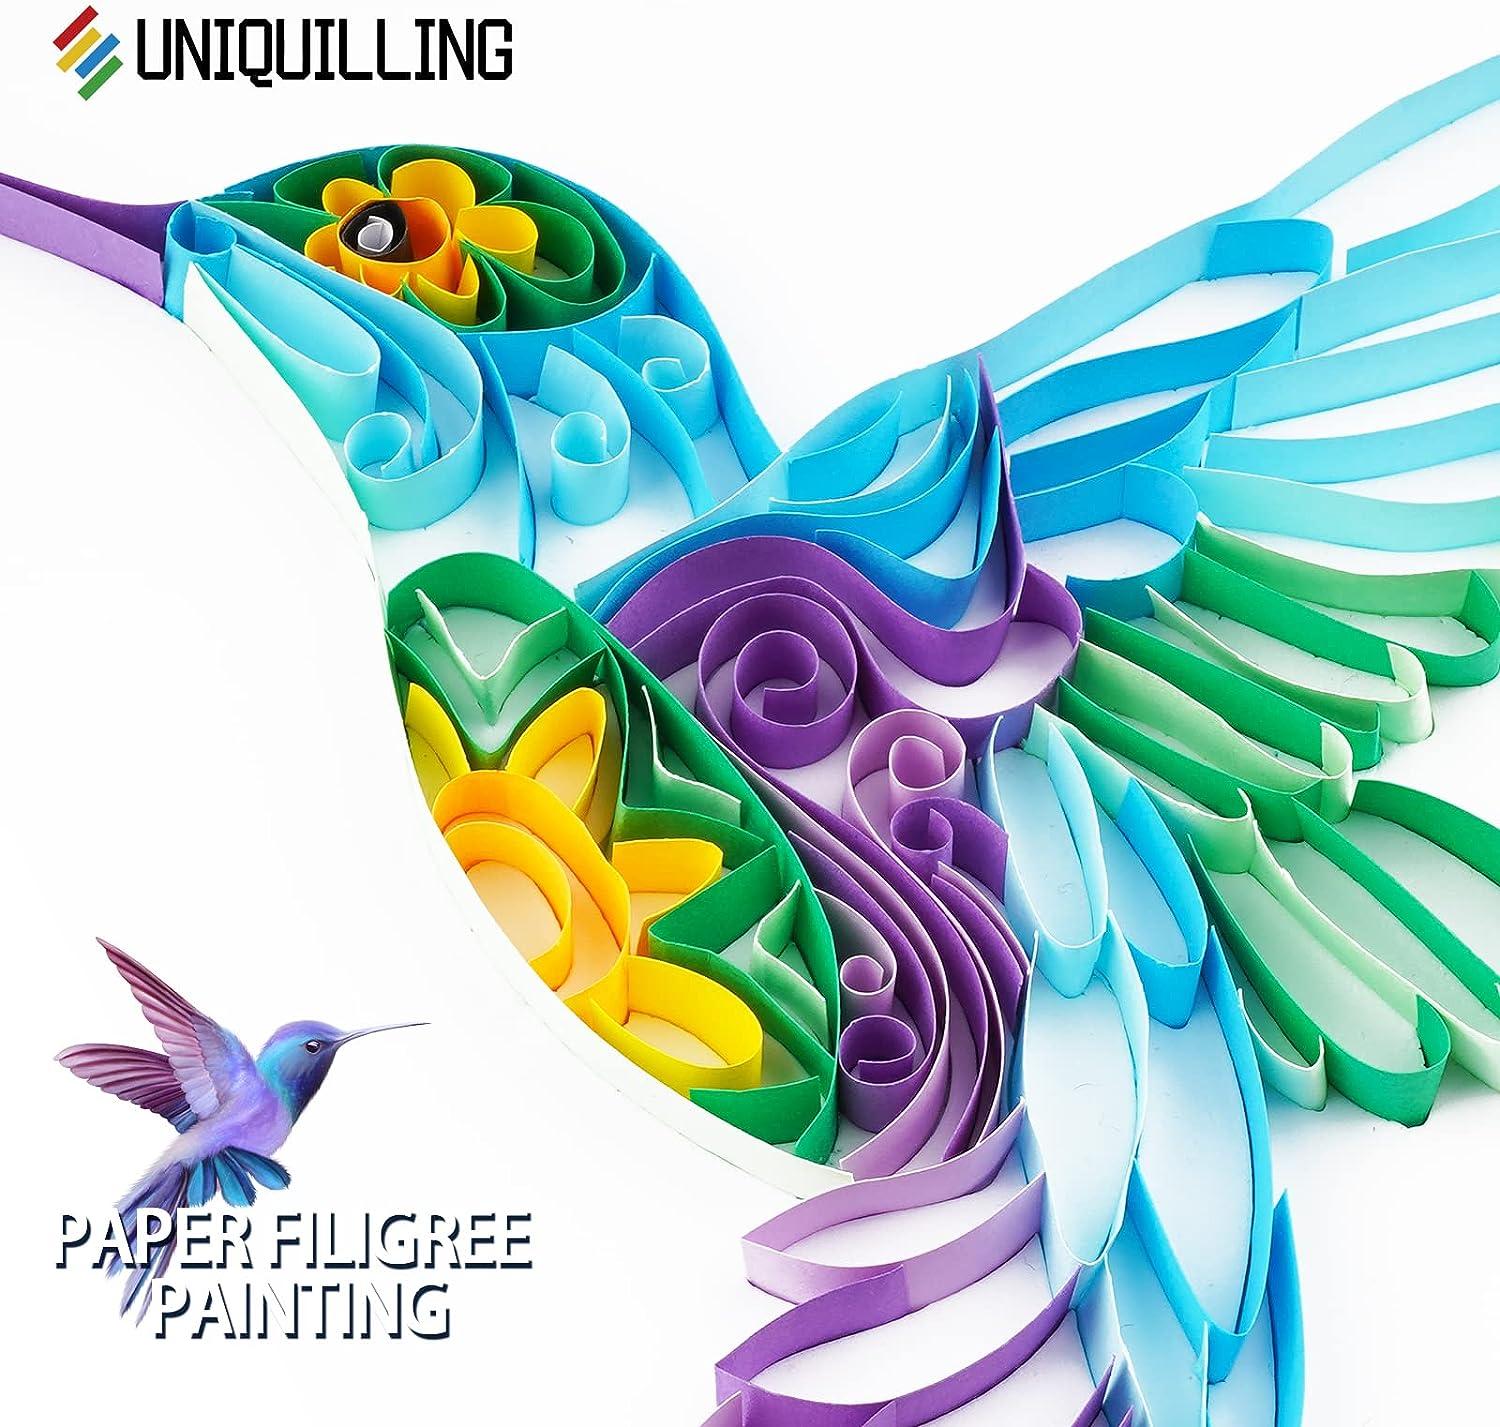 Uniquilling Quilling Kit Paper Quilling Kit for Adults Beginner